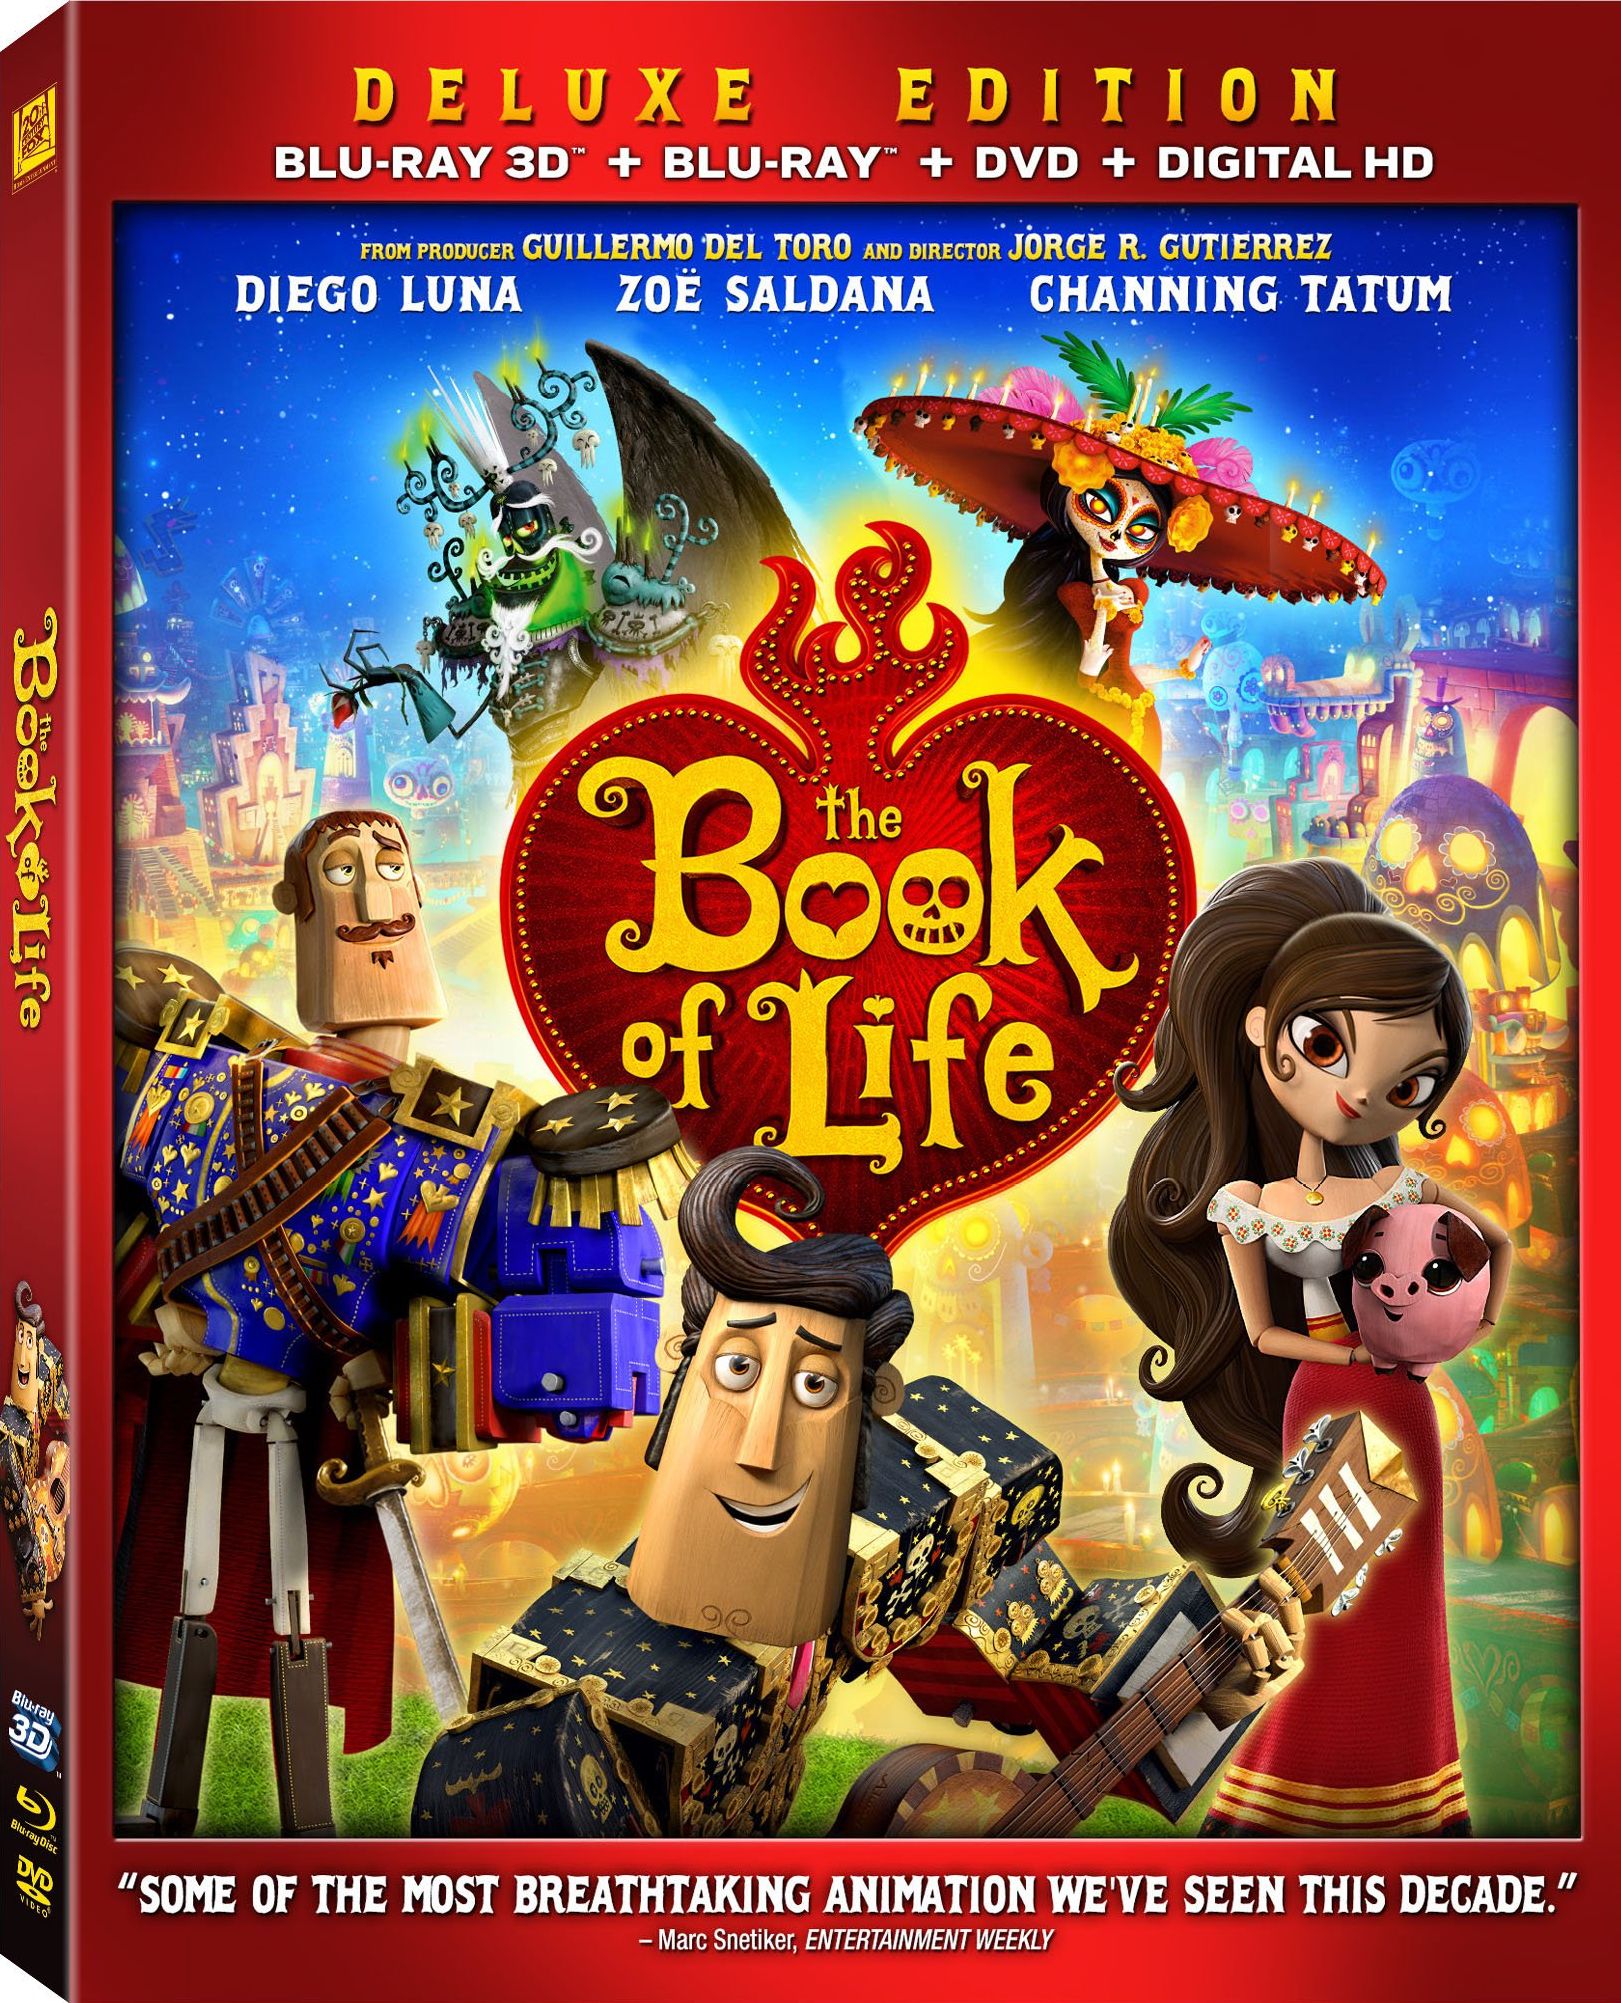  Book  of Life DVD  Release Date January 27 2022